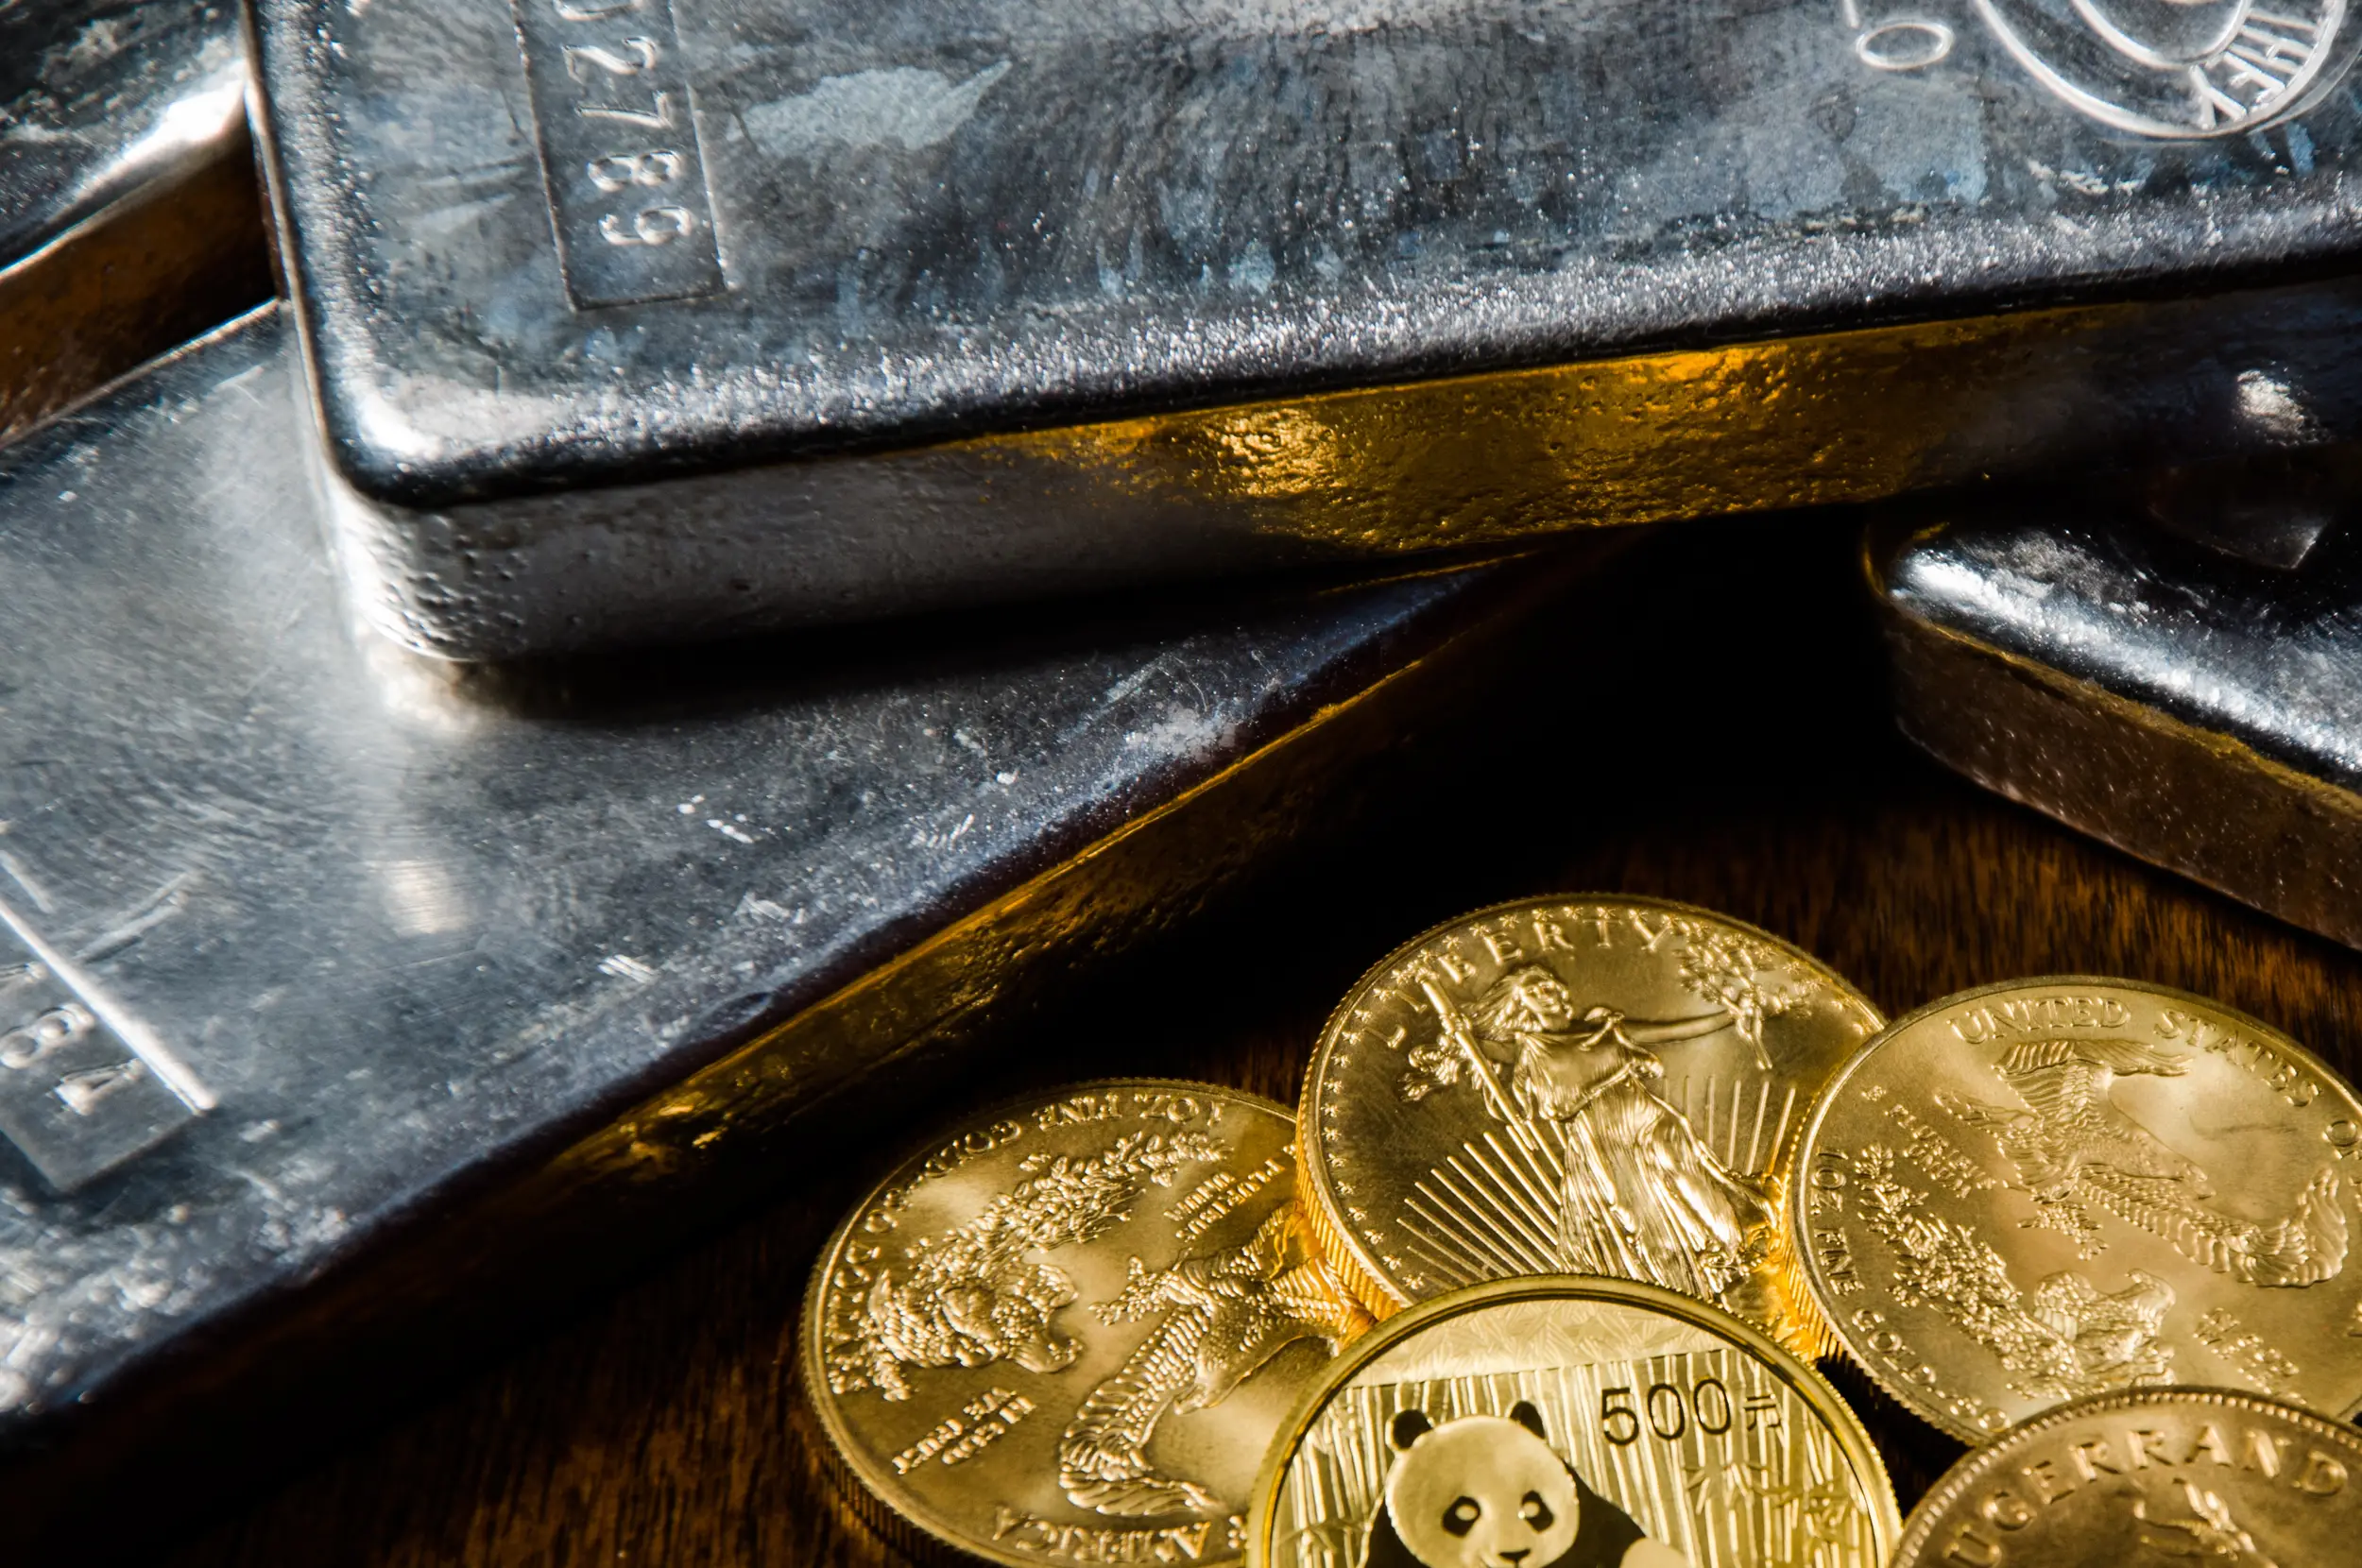 Market Report: Gold and silver may be due for a pause